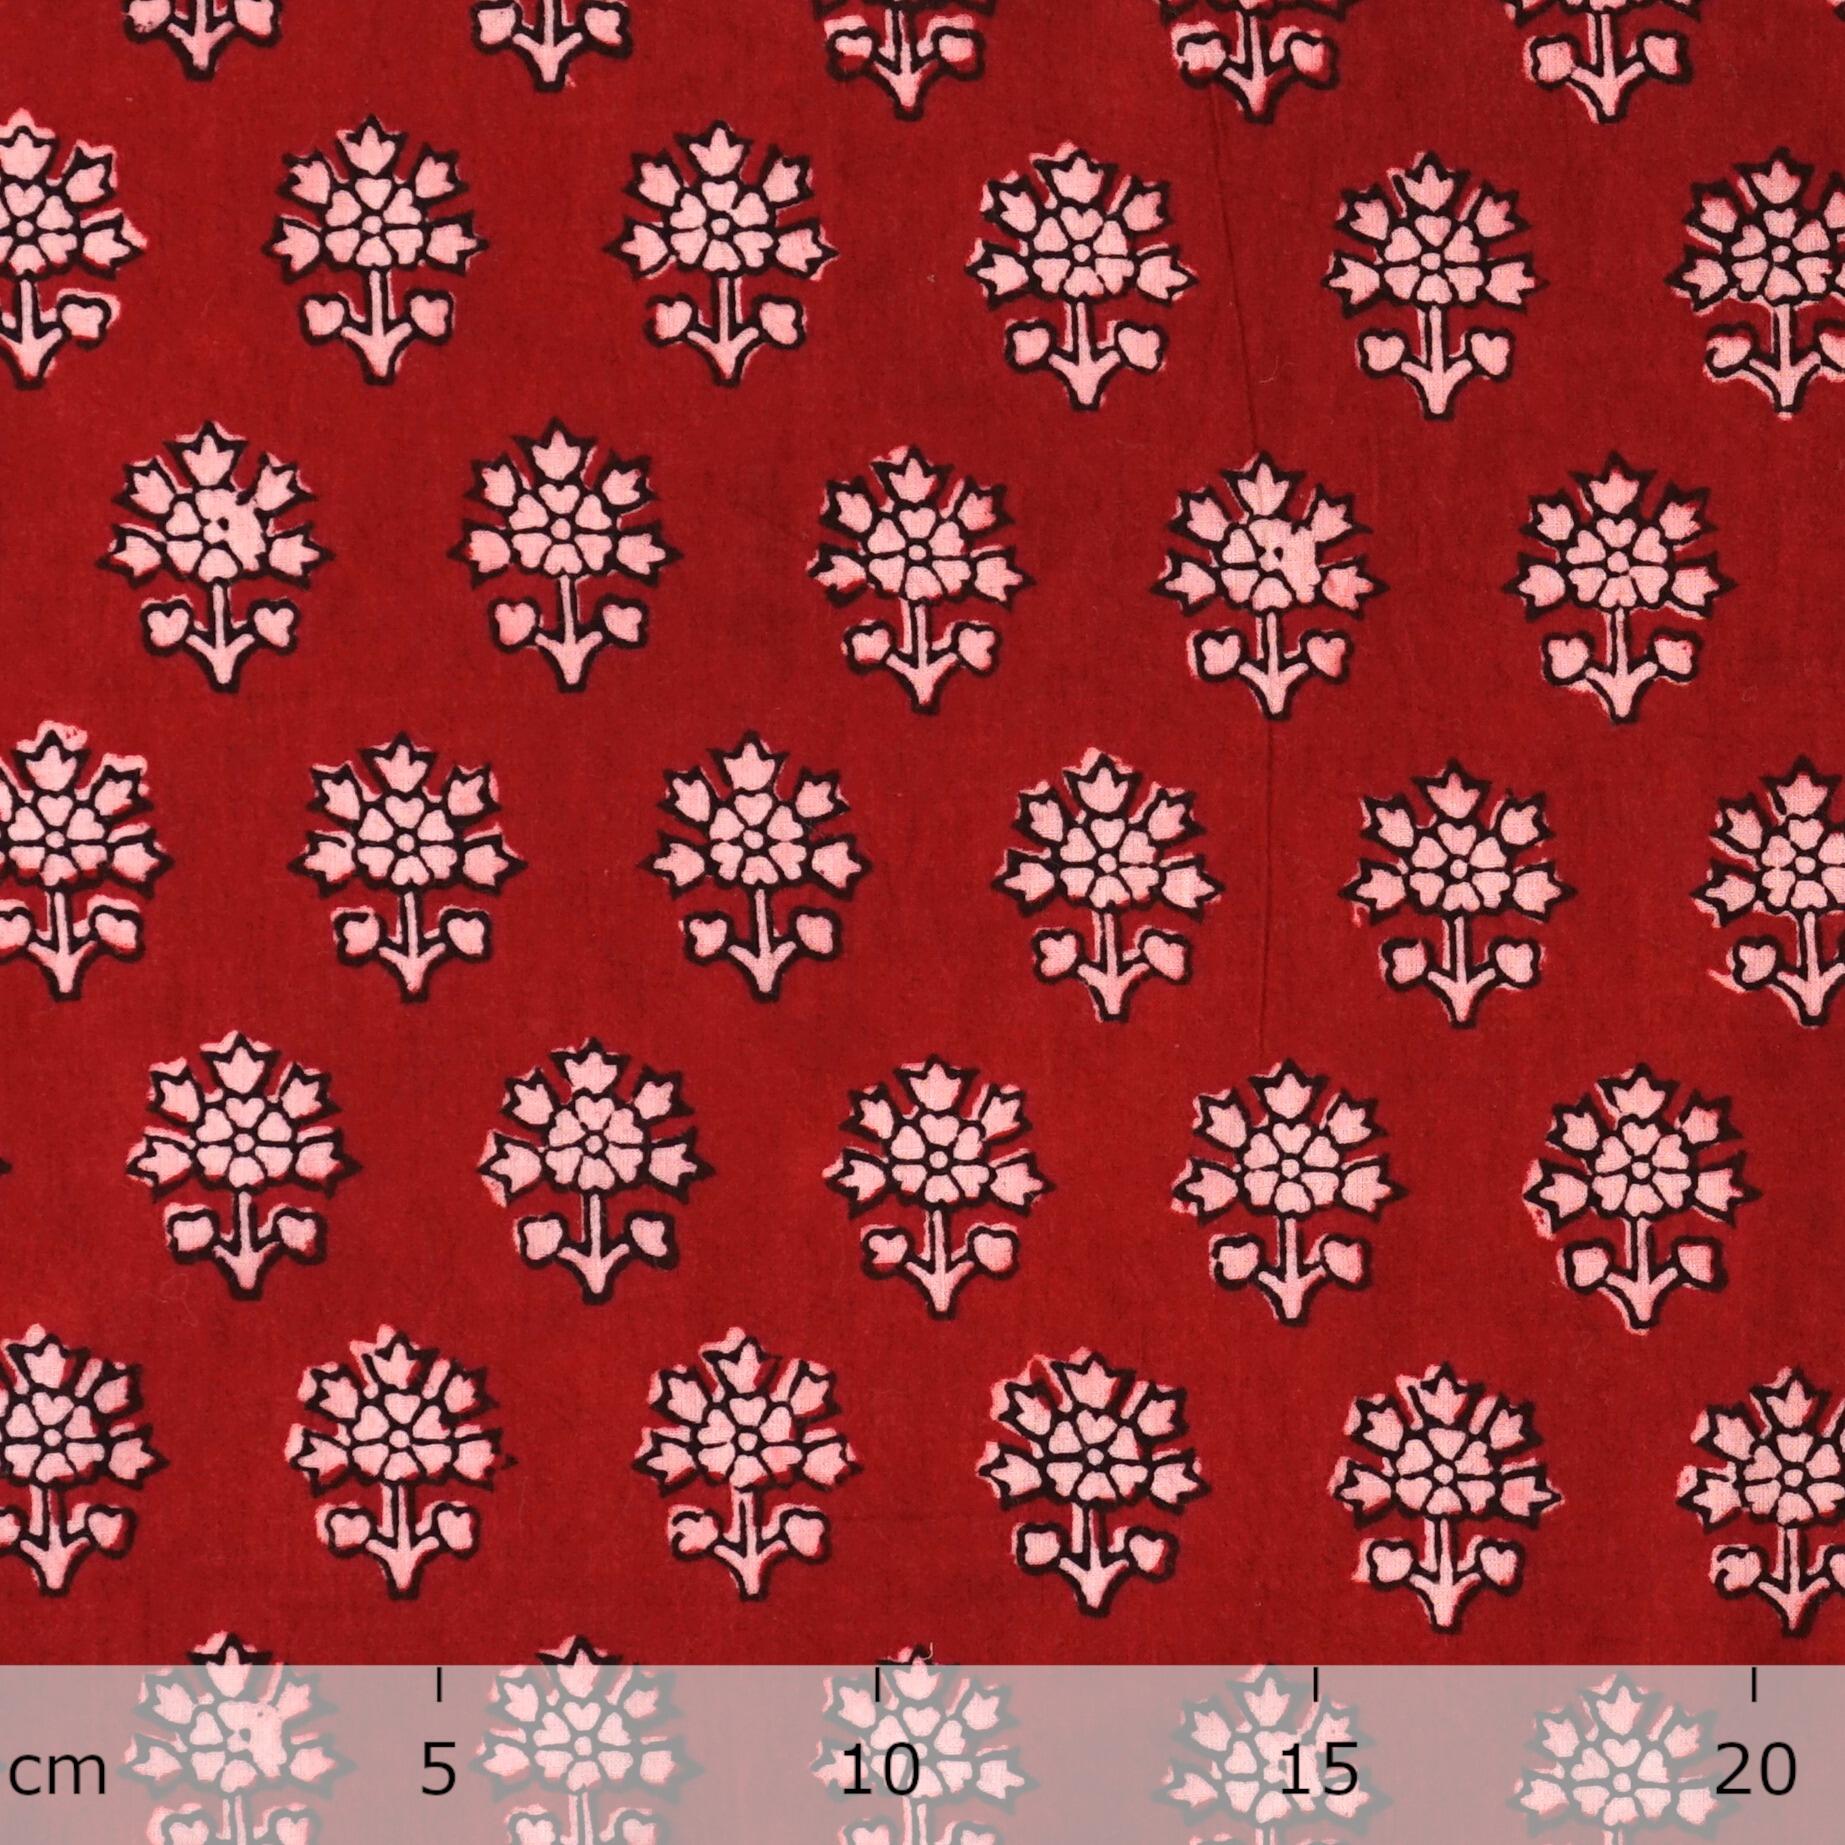 4 - ISK10 - 100% Block-Printed Cotton Fabric From India - New Perspective Design - Iron Rust Black & Alizarin Red Dyes - Ruler